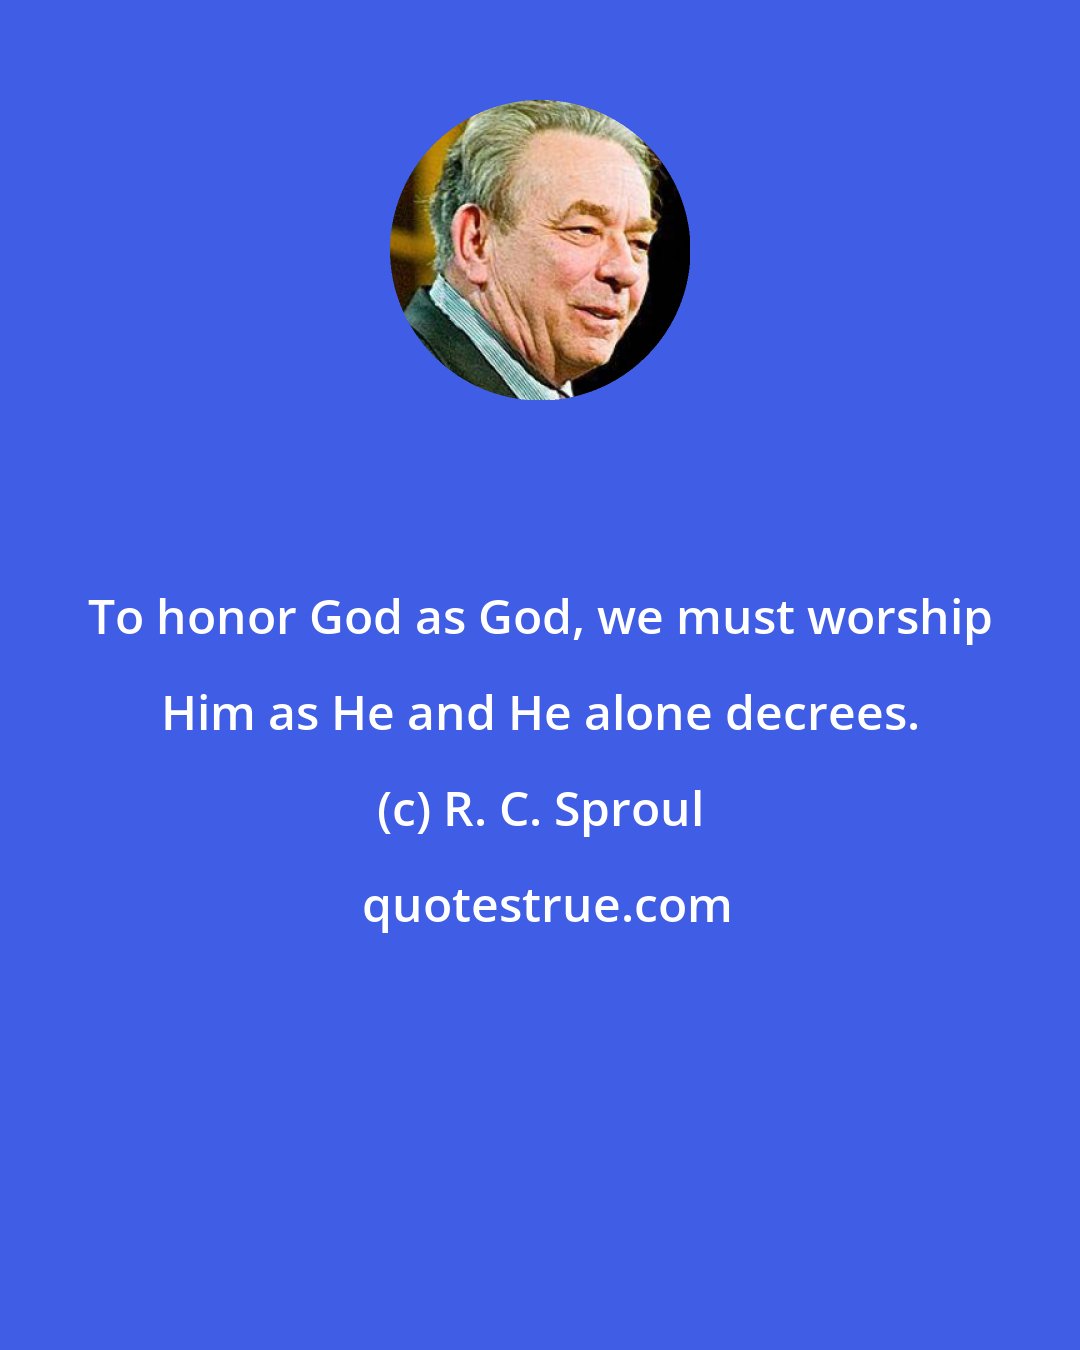 R. C. Sproul: To honor God as God, we must worship Him as He and He alone decrees.